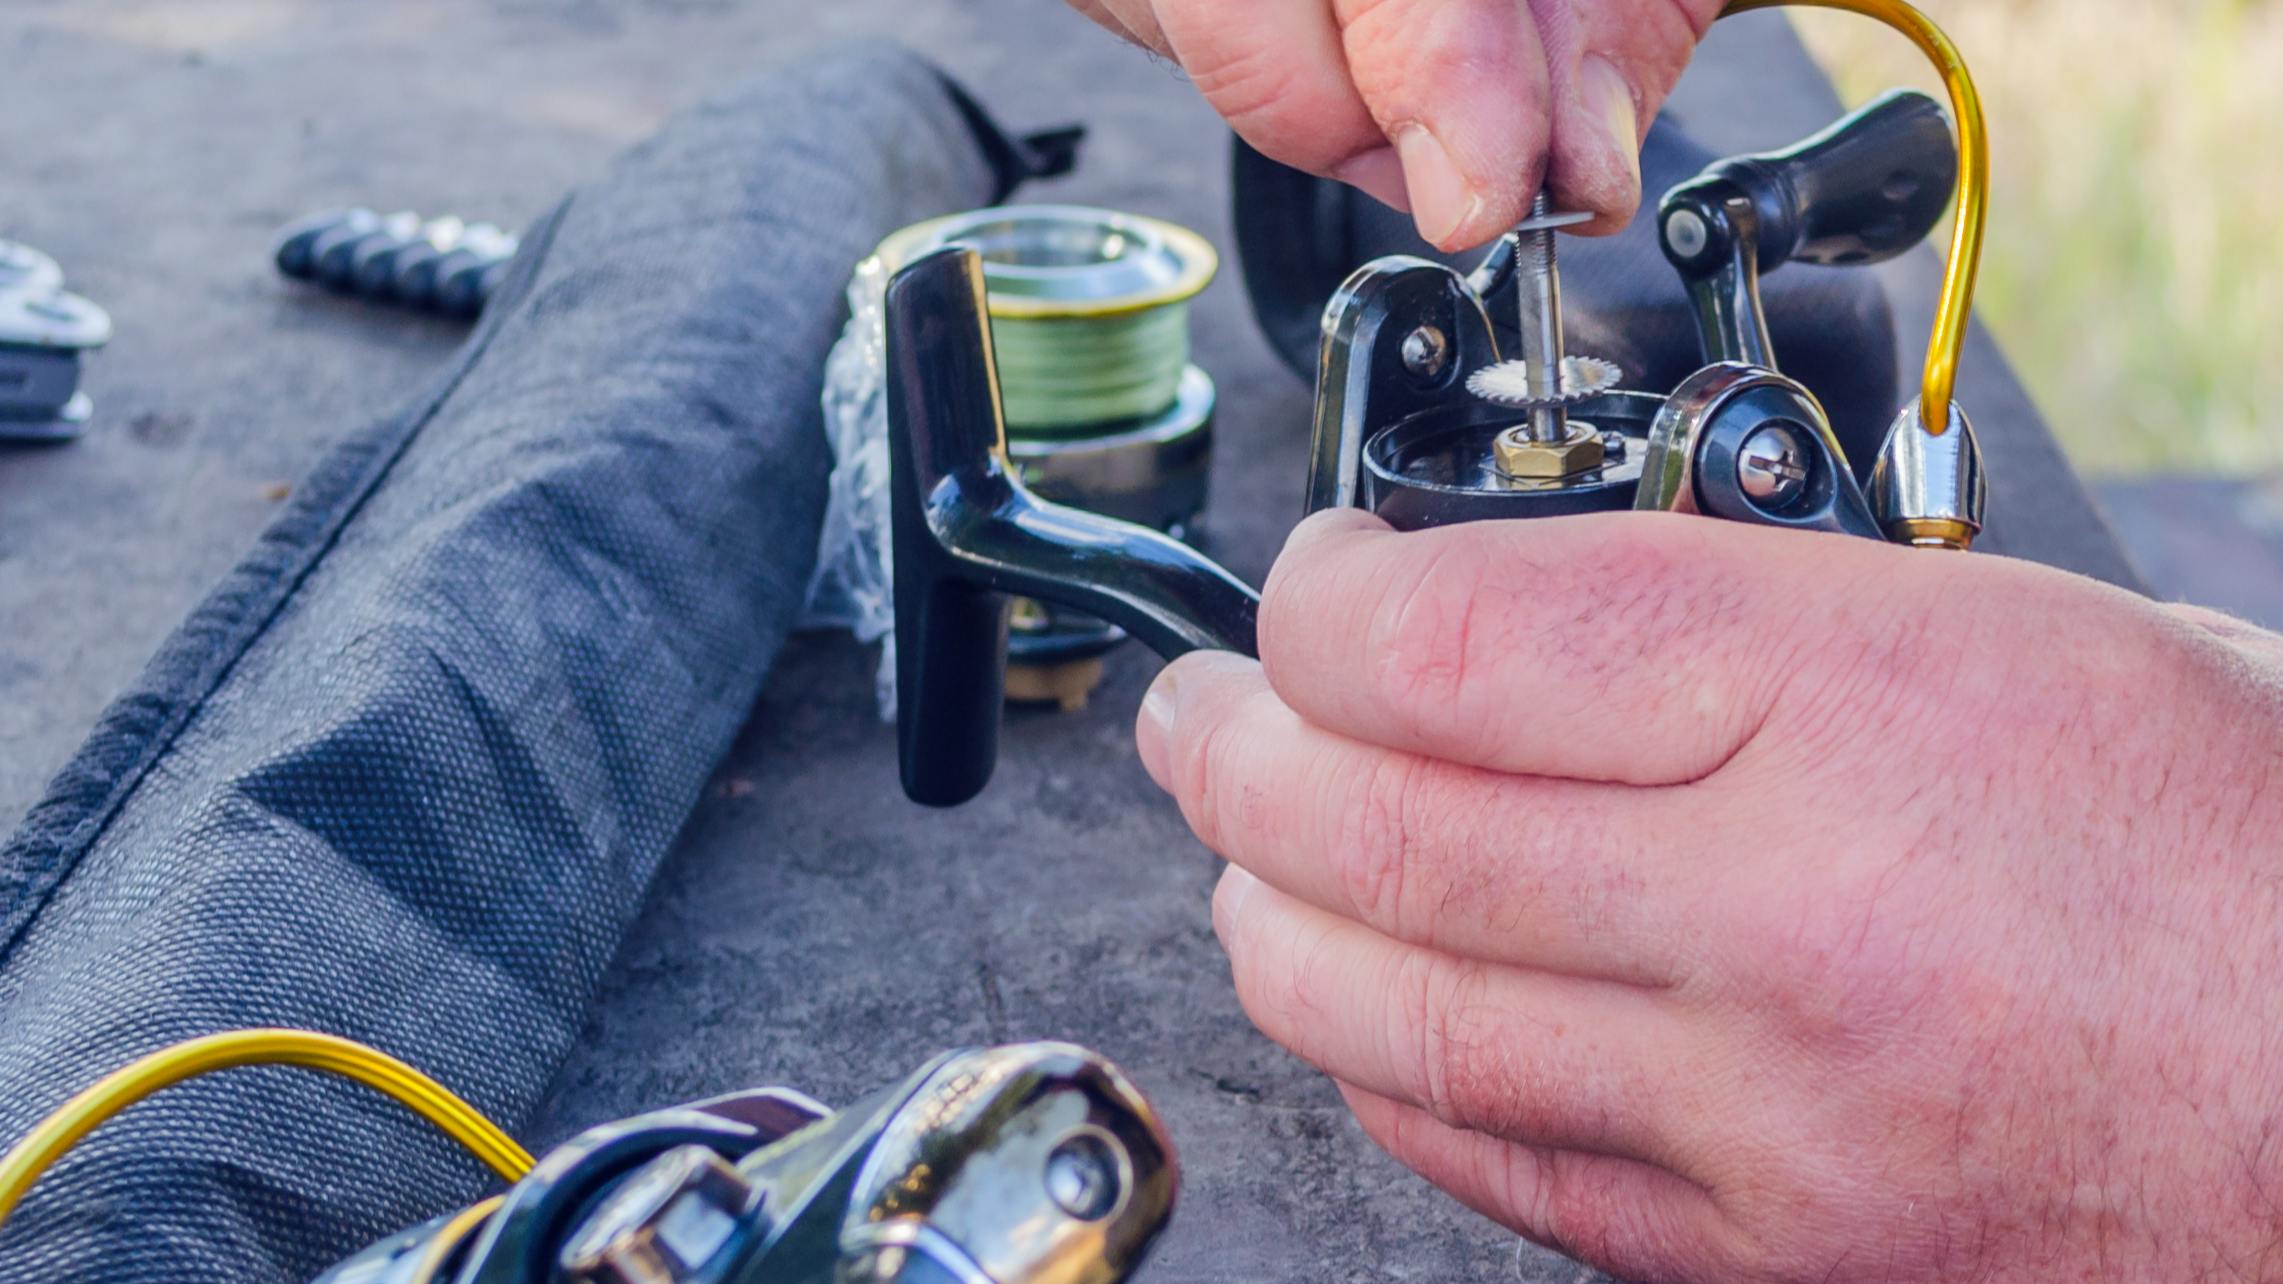 Hands working on a fishing reel.